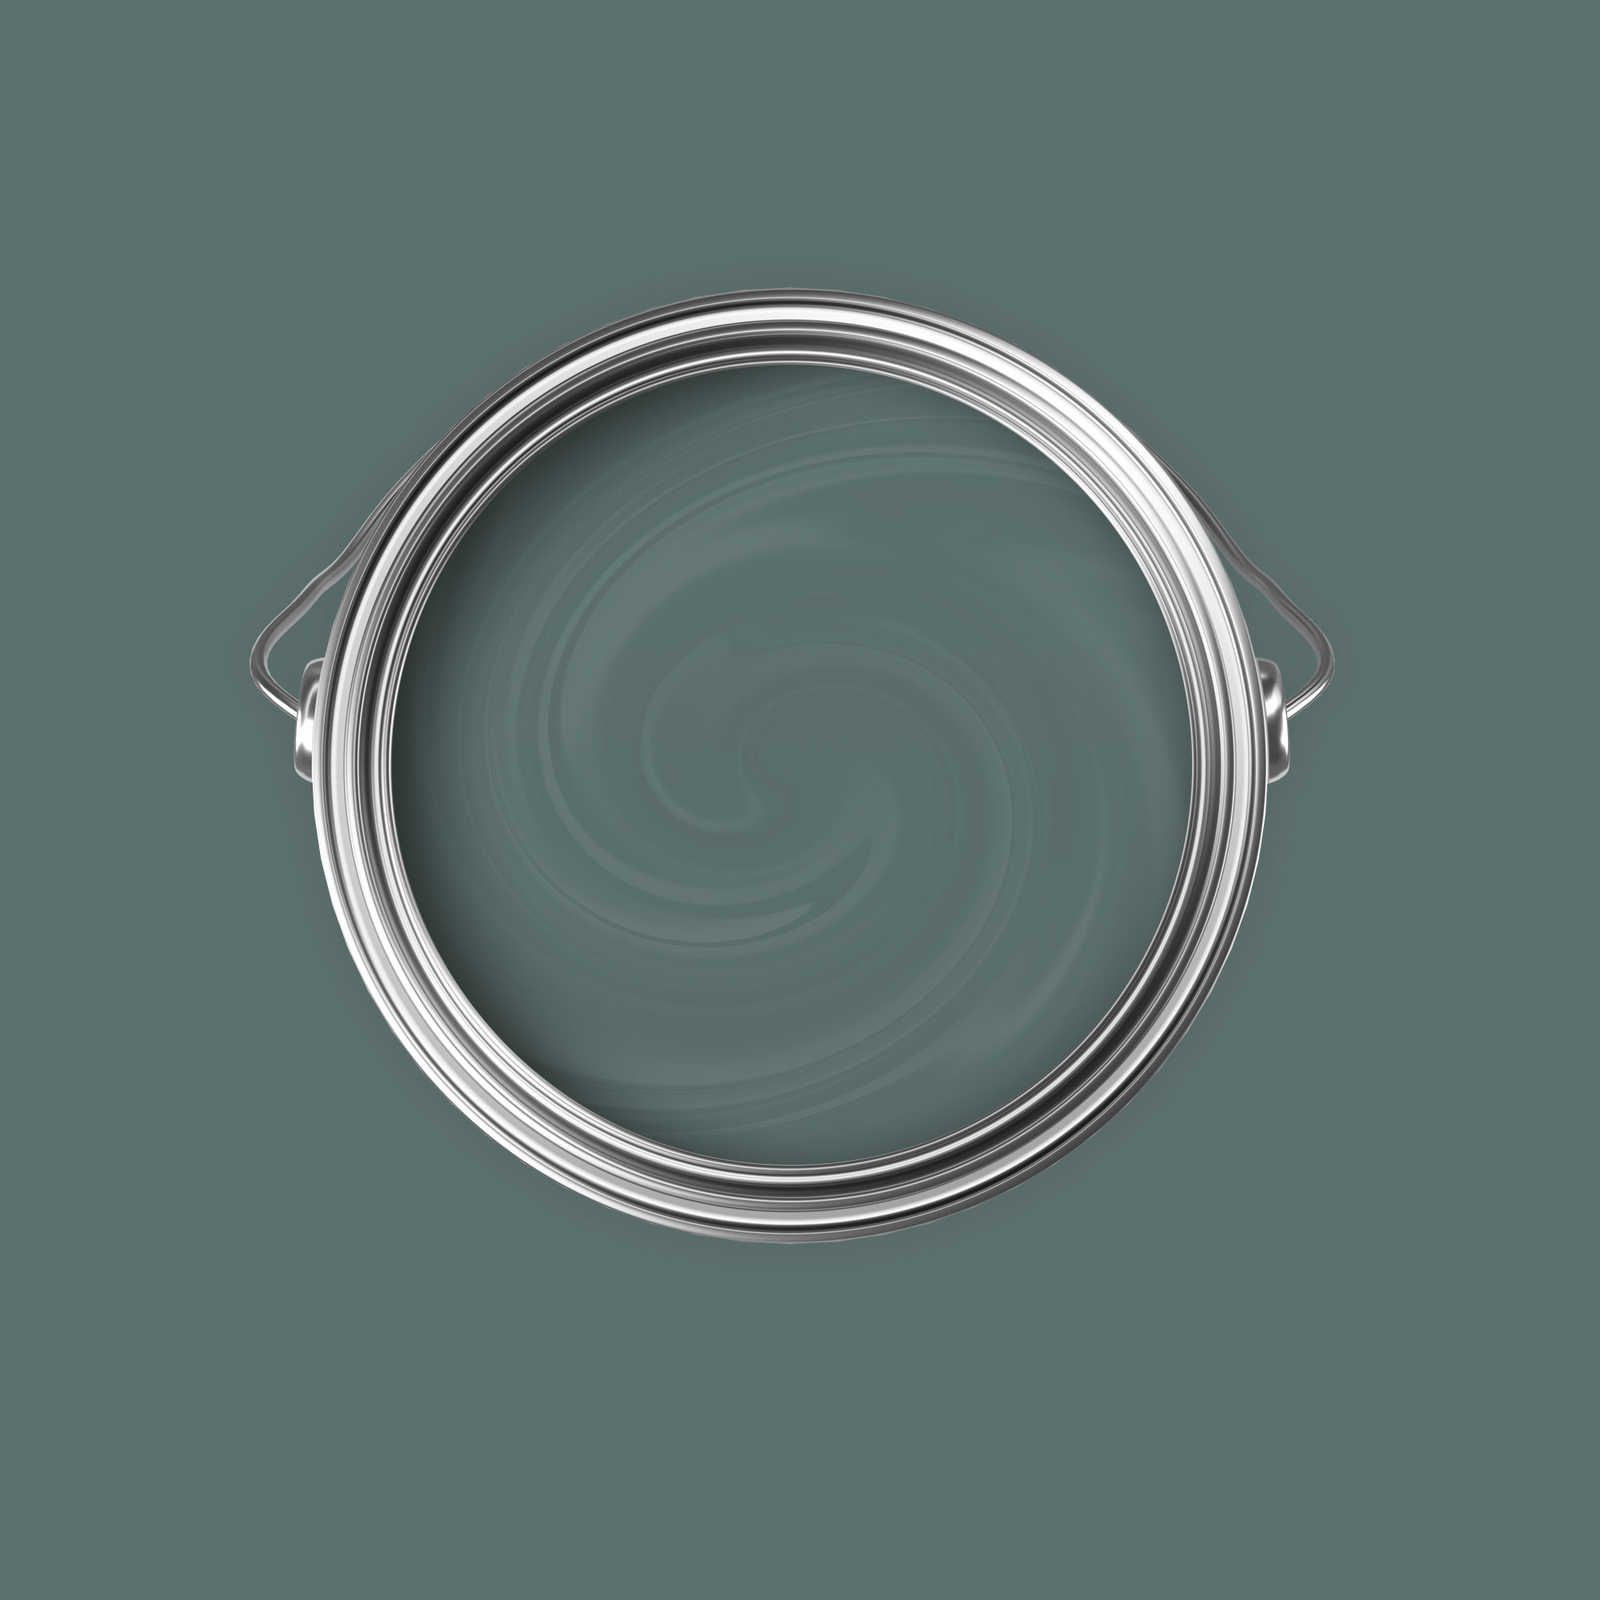             Premium Wall Paint Relaxing Grey Green »Sweet Sage« NW405 – 5 litre
        